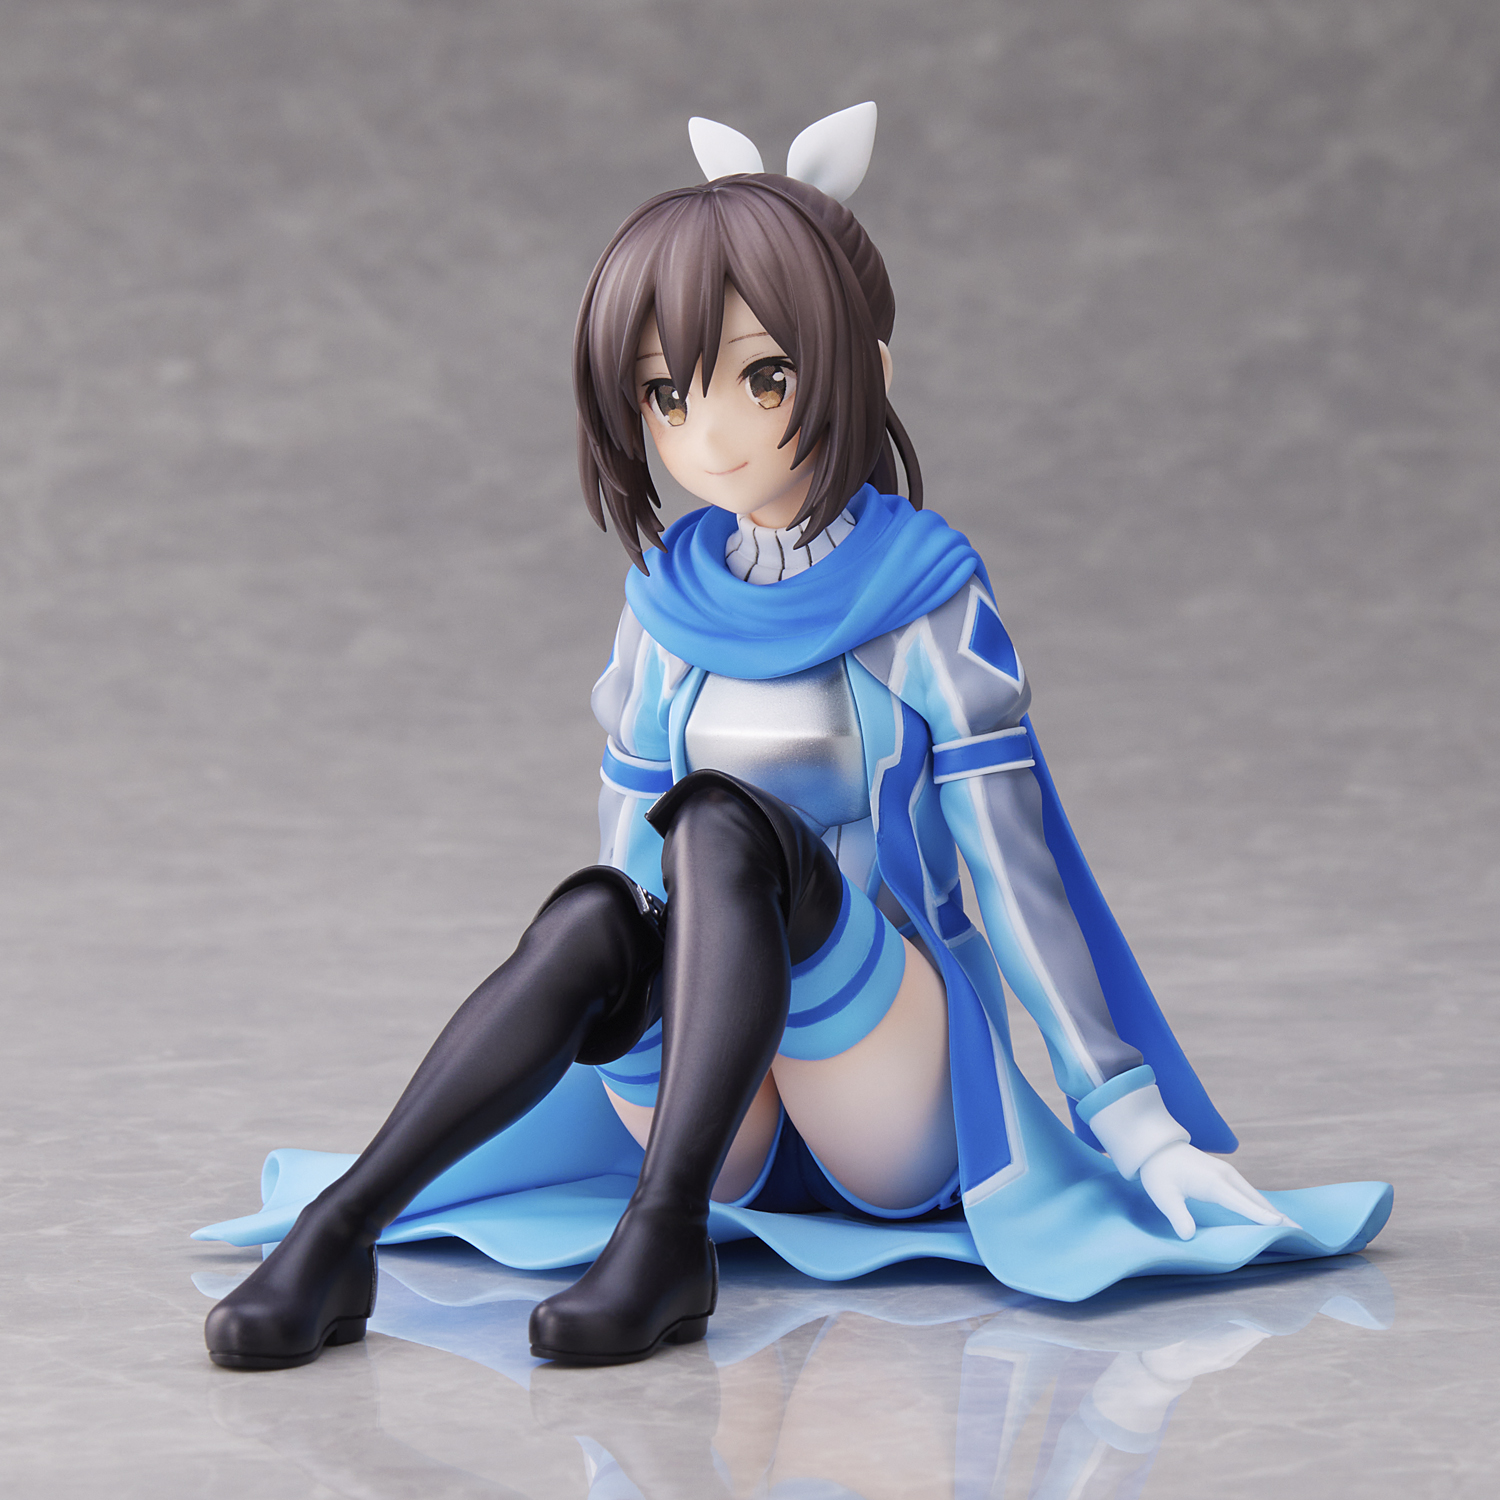 Figurine BOFURI: I Don't Want to Get Hurt, so I'll Max Out My Defense - Sally - Union Creative